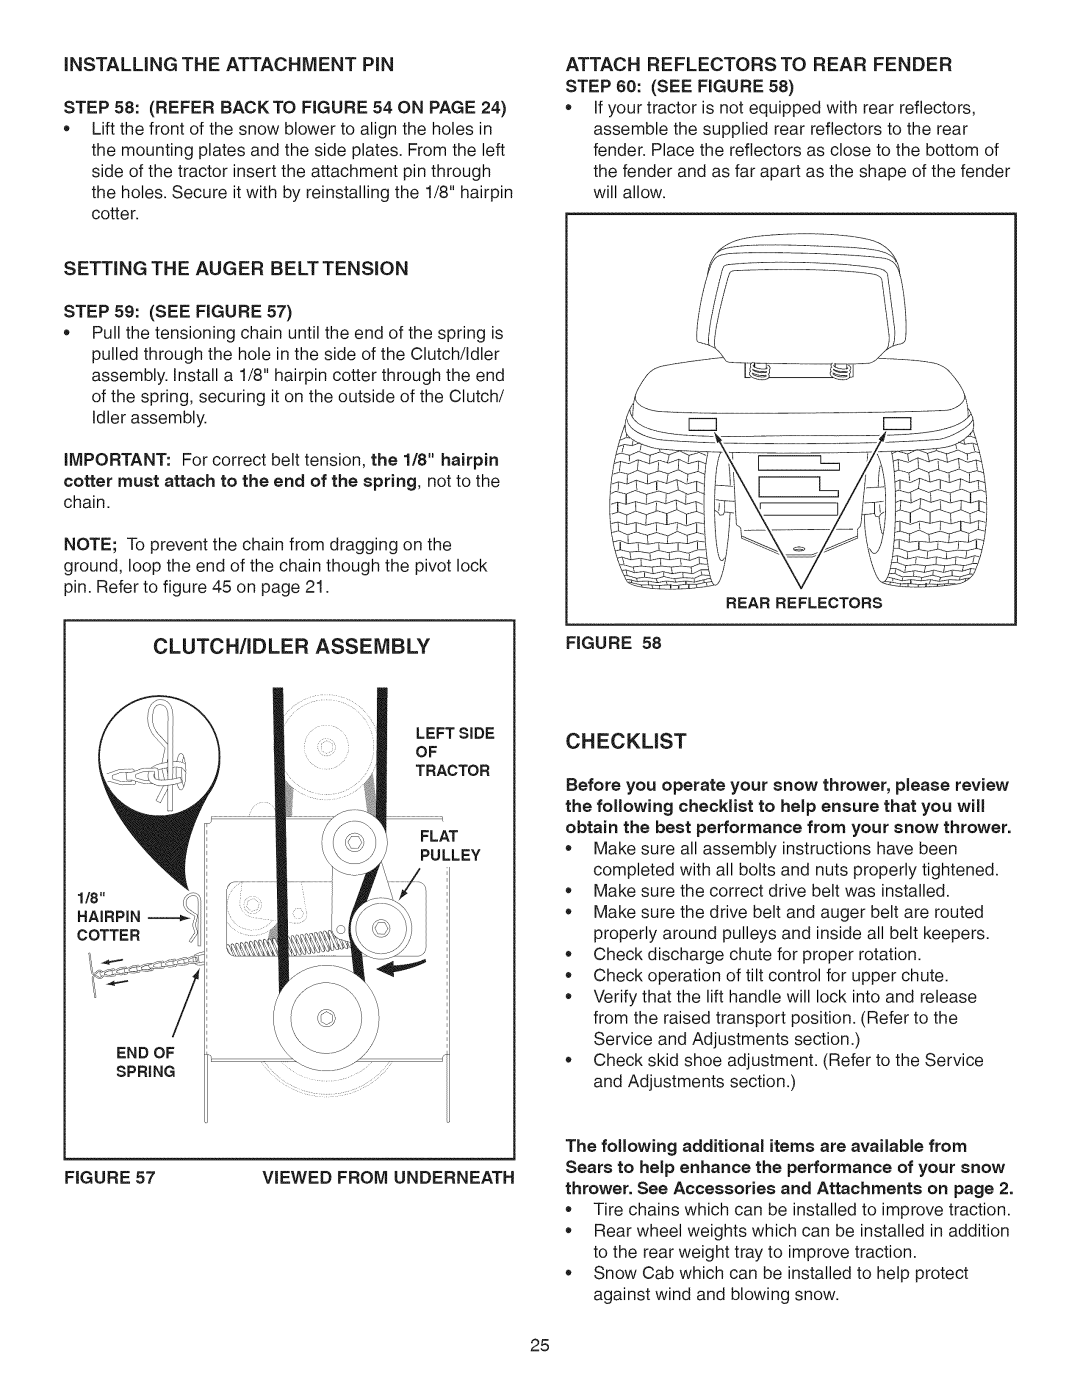 Craftsman 486.24837 manual Clutch/Idler Assembly, Checklist, Setting The Auger Belt Tension 